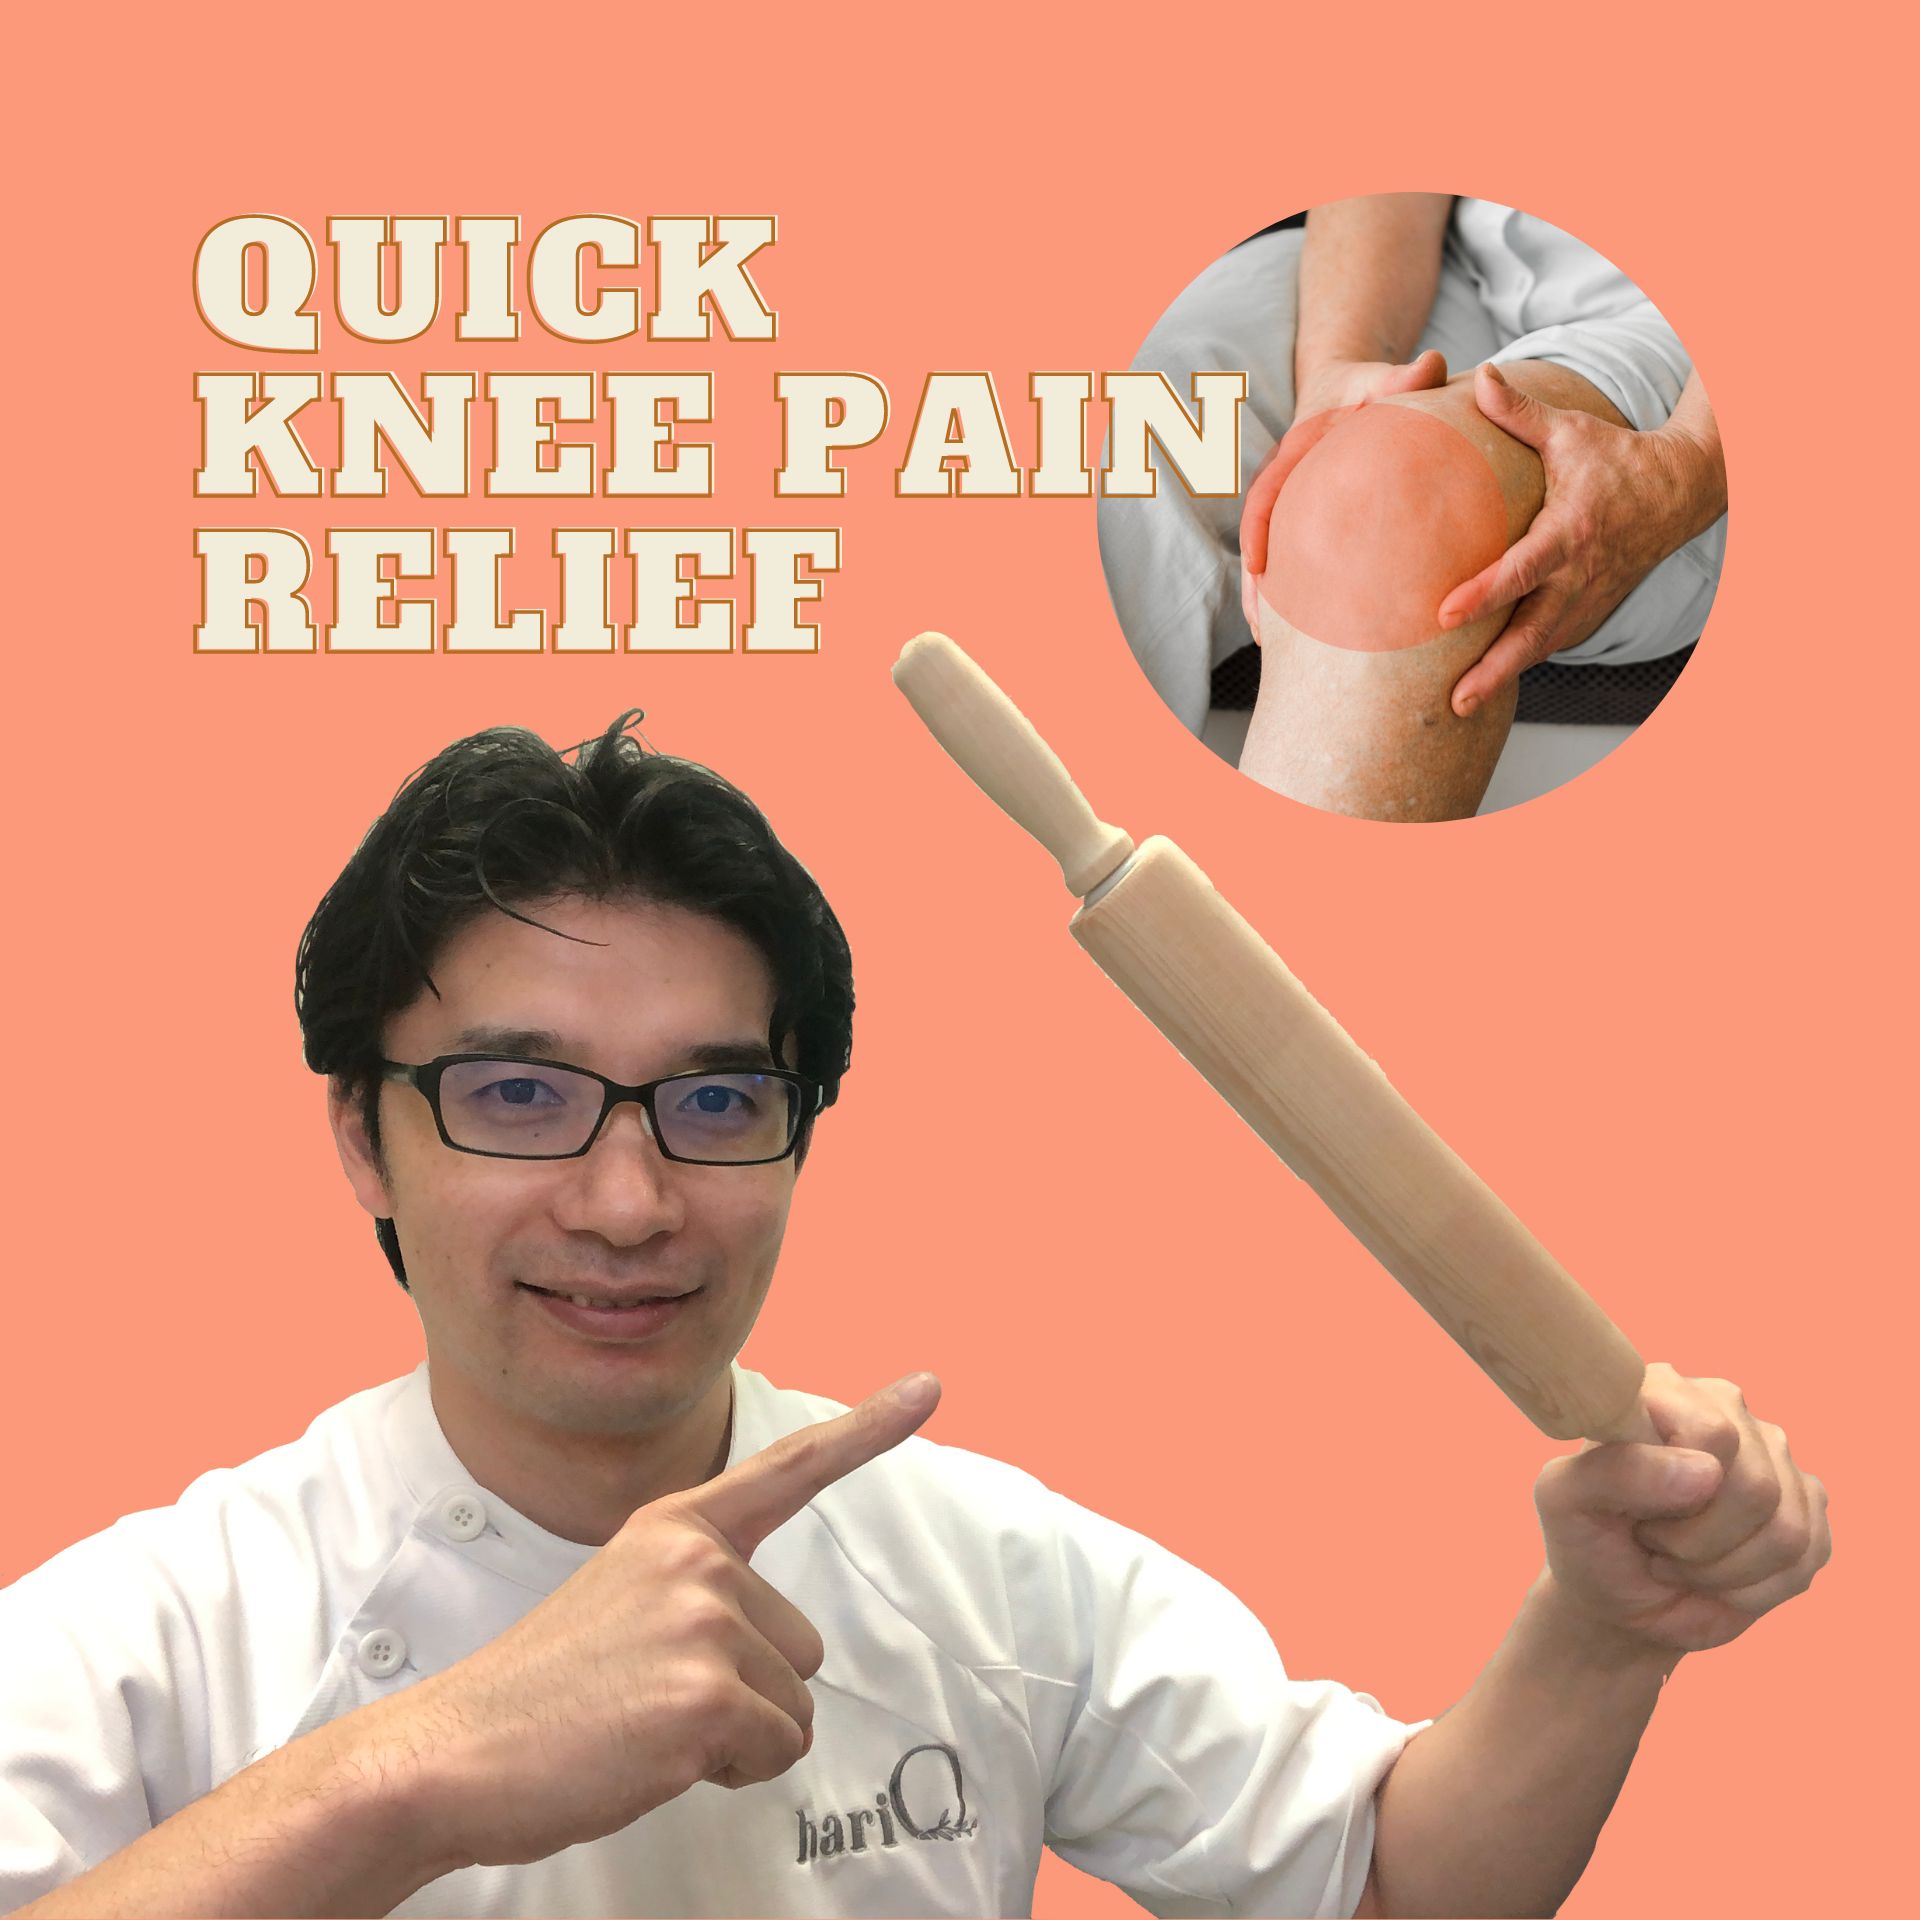 How To Treat Your Knee Pain at Home with A Rolling Pin